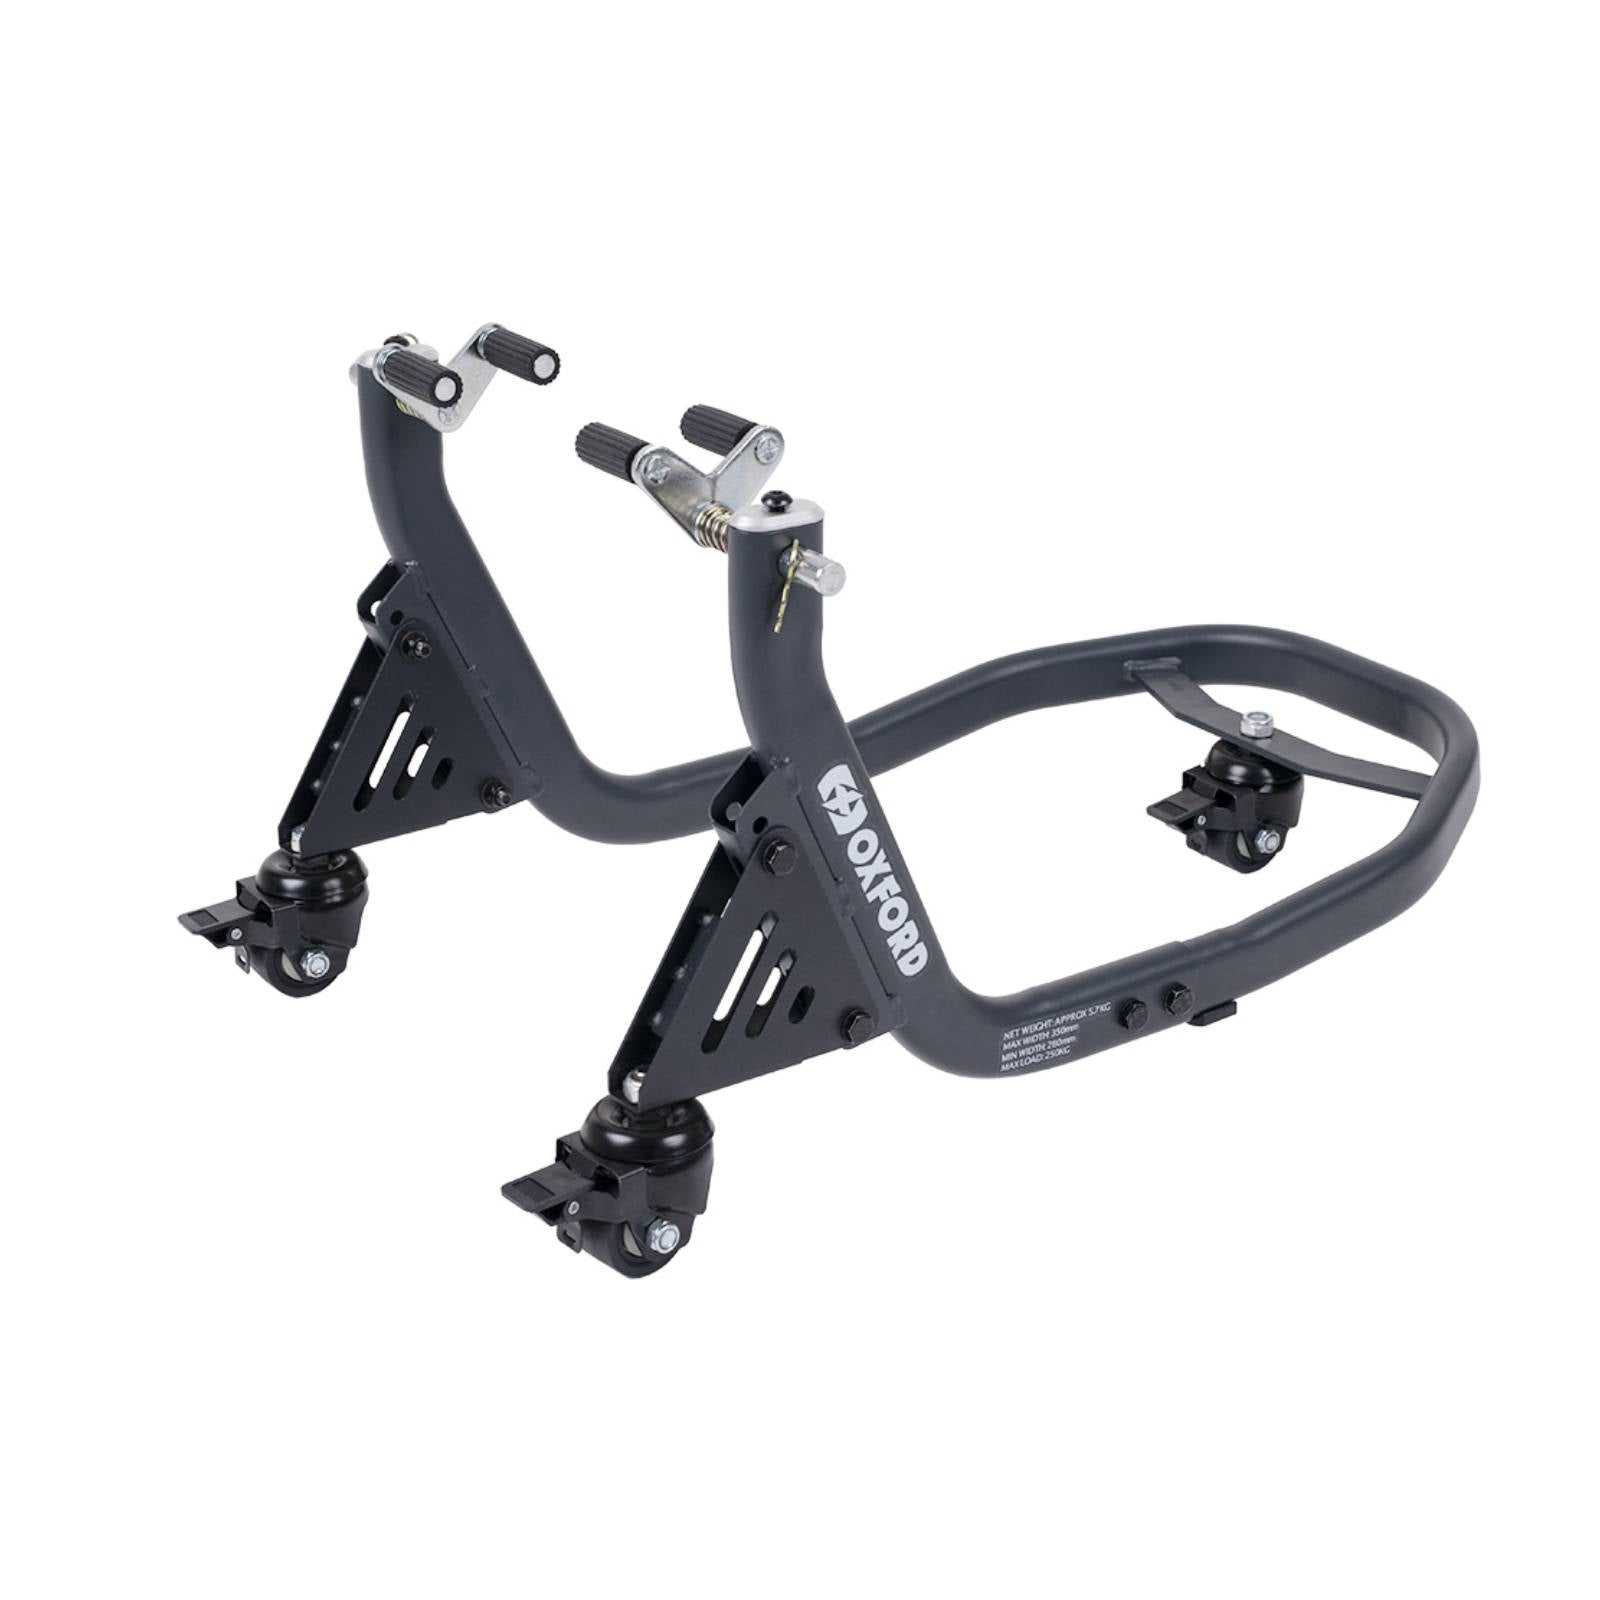 Oxford, OXFORD ZERO G FRONT DOLLY PADDOCK STAND